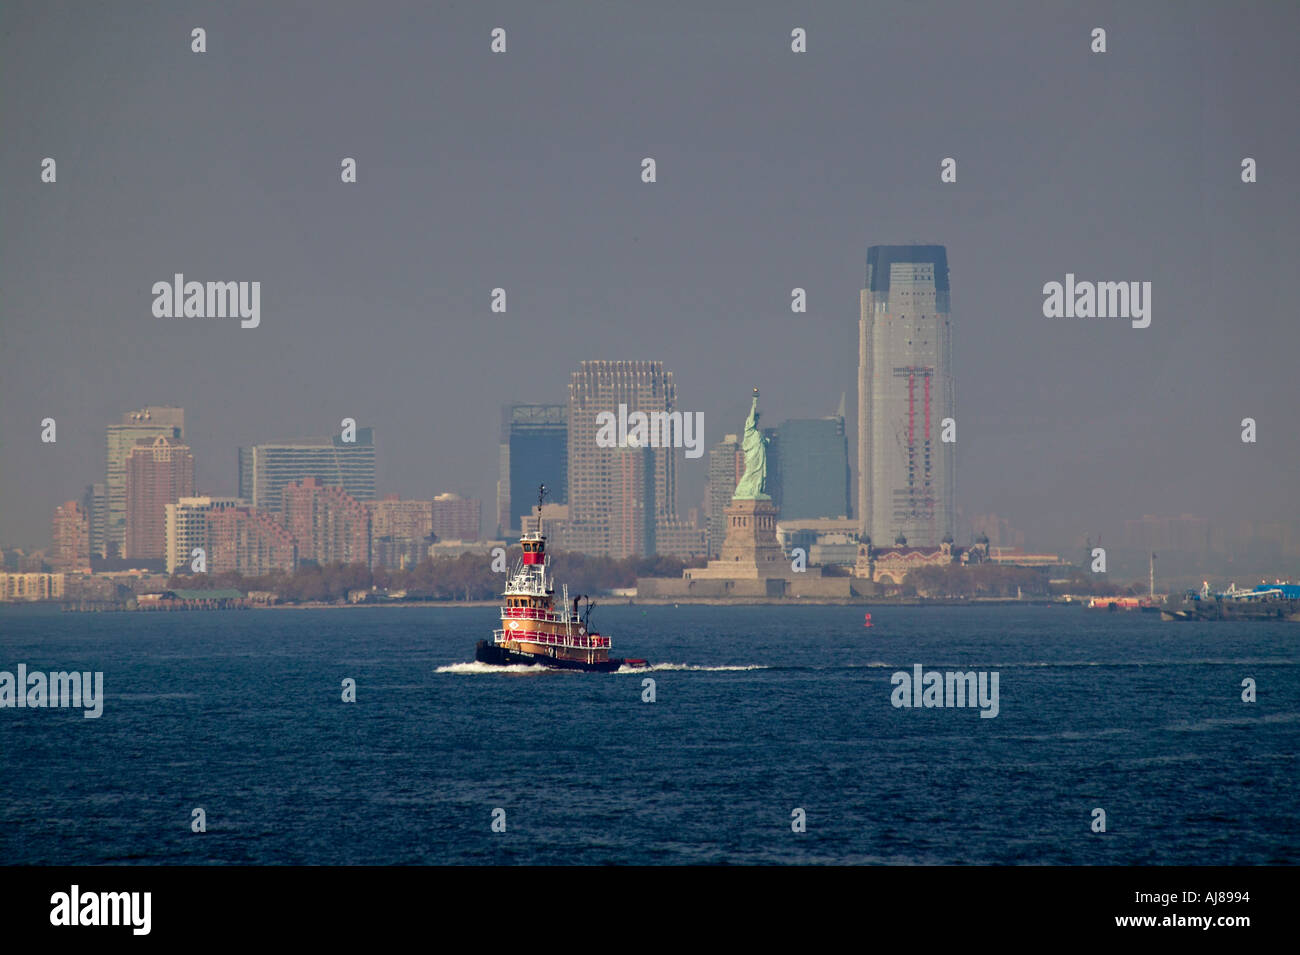 Tug boat on the Hudson River with Hoboken New Jersey skyline and Statue of Liberty in background Stock Photo